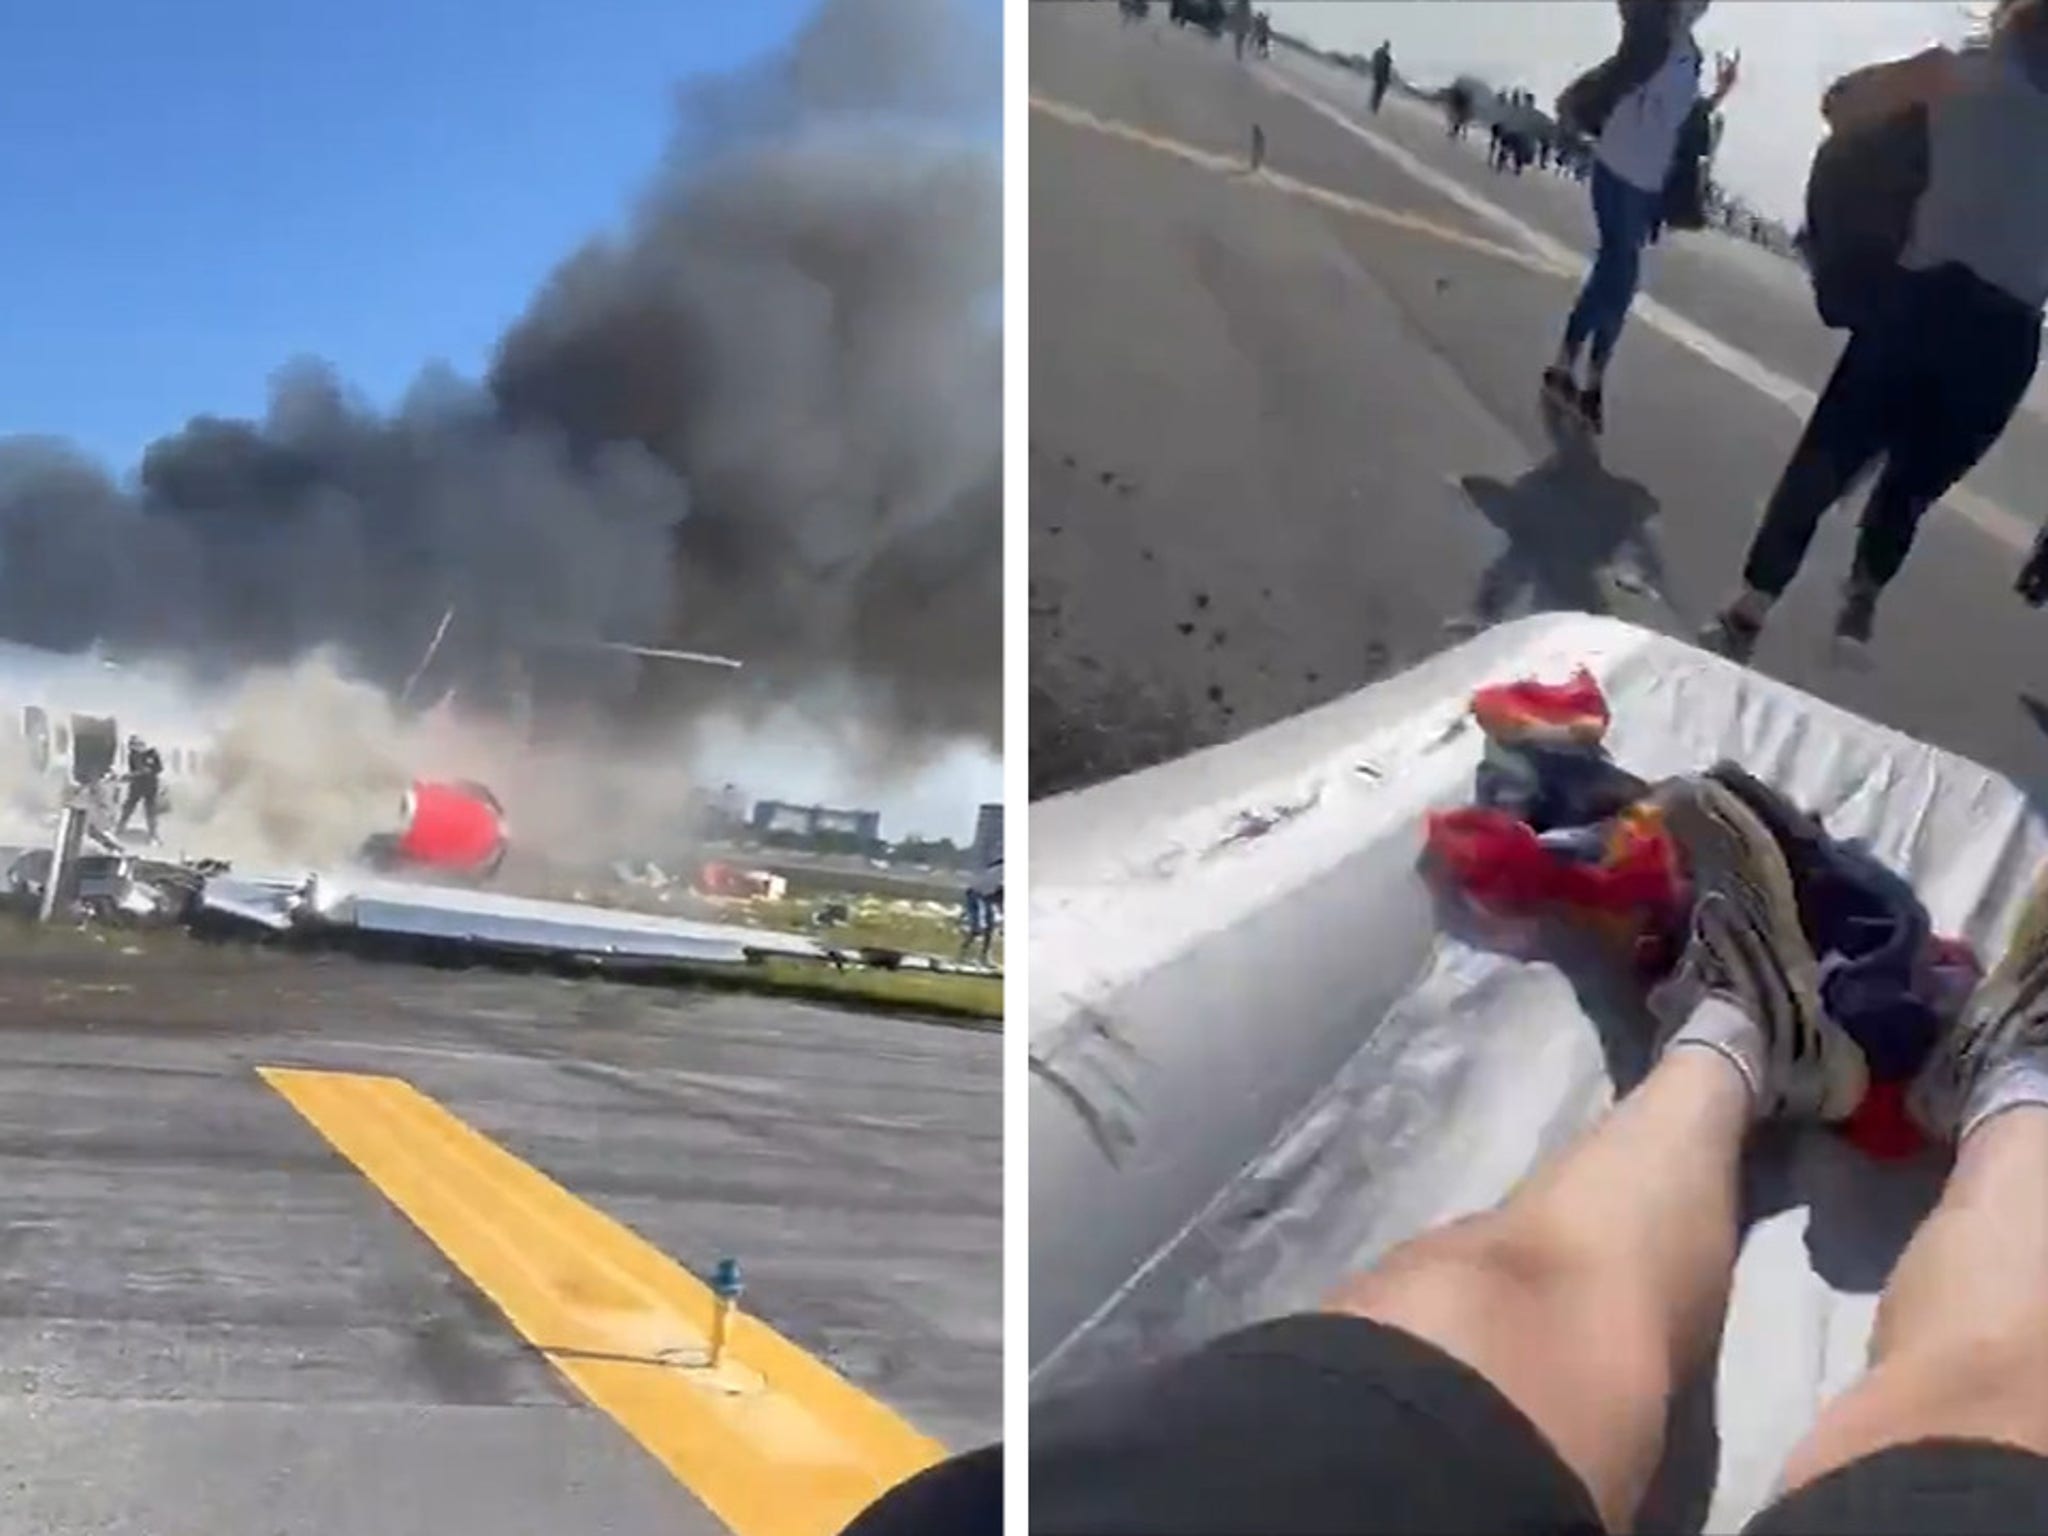 Arsenal Women's plane catches fire on runway to delay return from